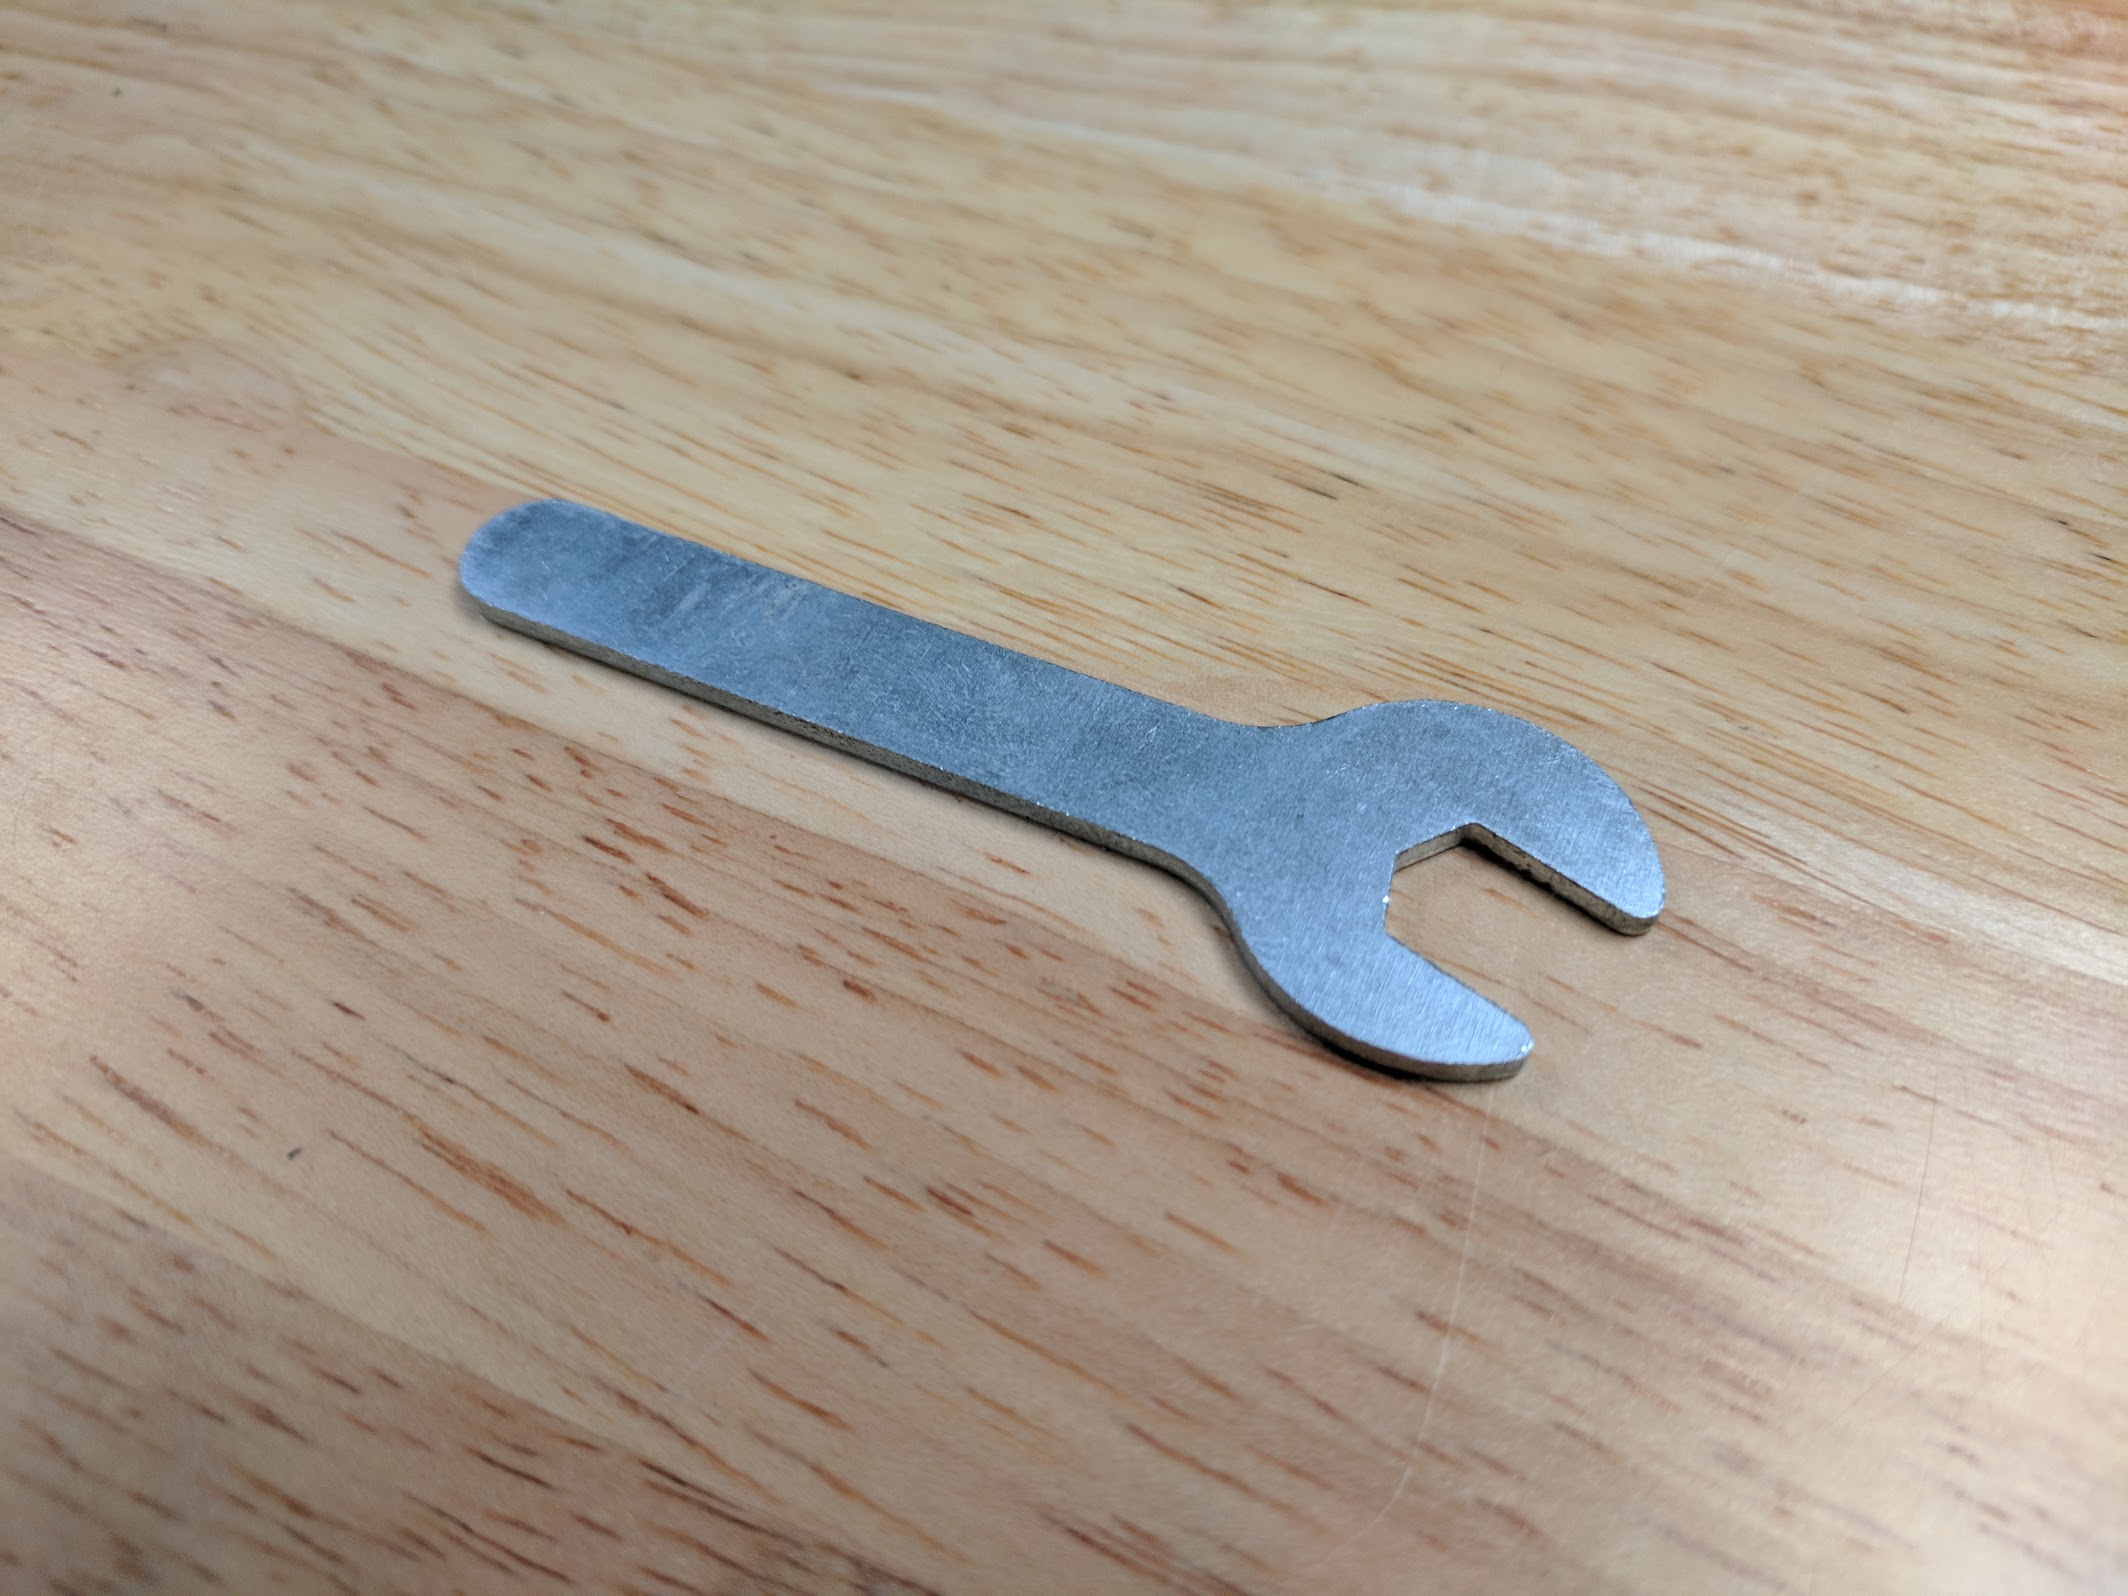 8mm wrench